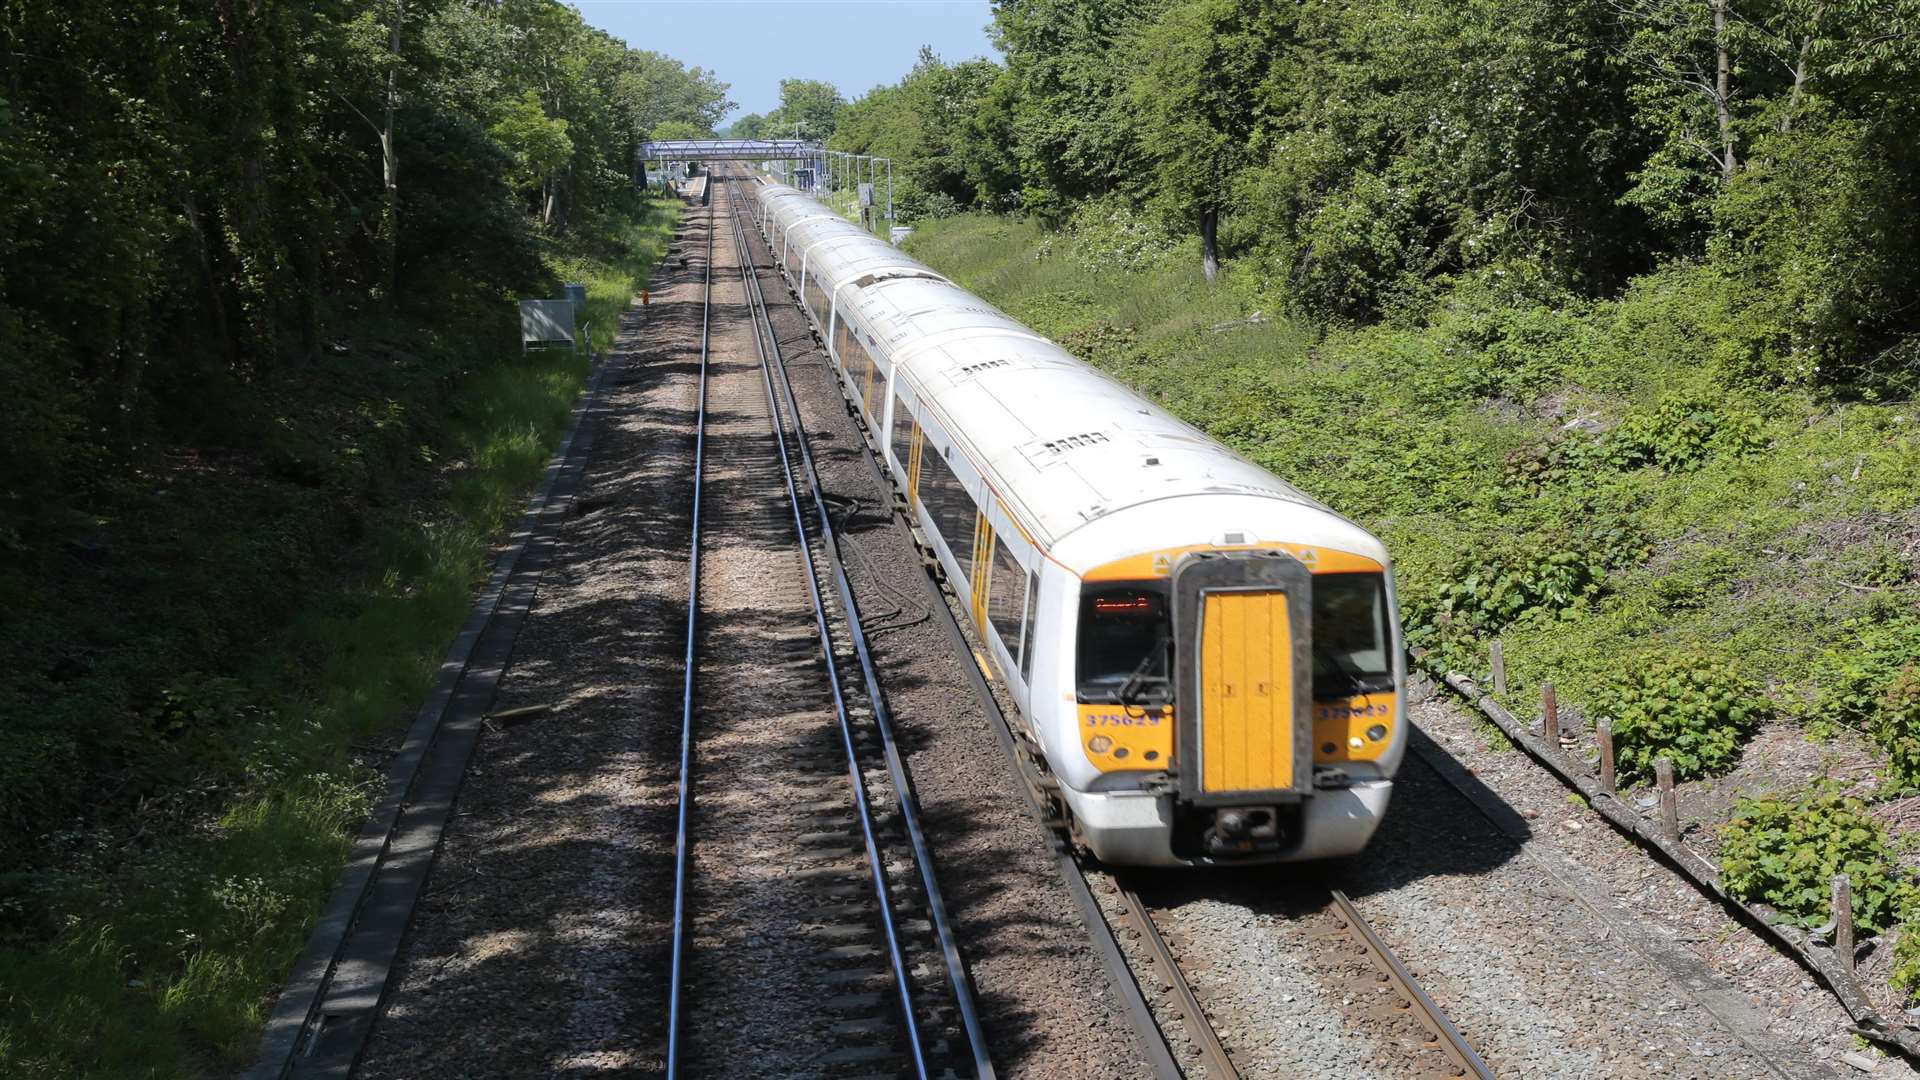 The consultation proposes cutting services to rural stations